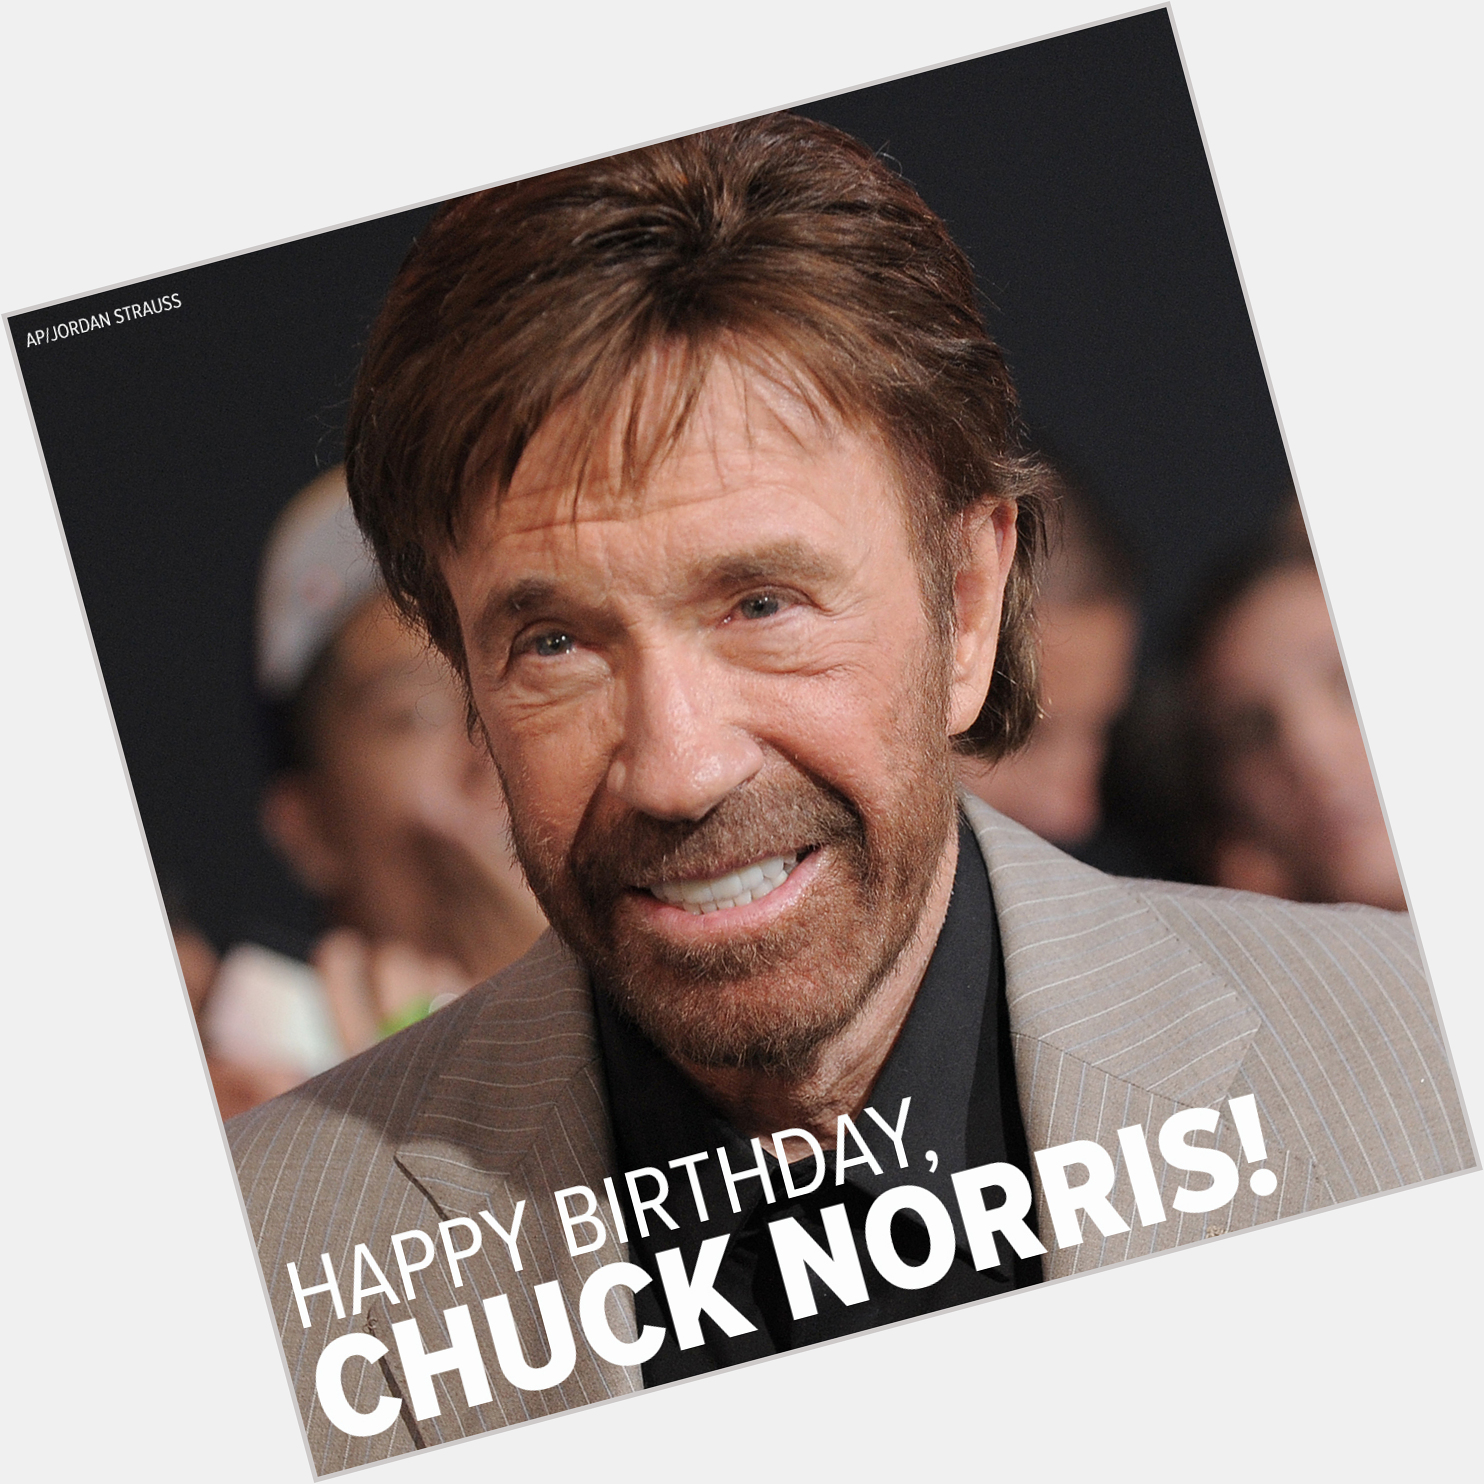 Chuck Norris doesn\t celebrate his birthday, his birthday celebrates him. 

Happy birthday, Chuck Norris! 